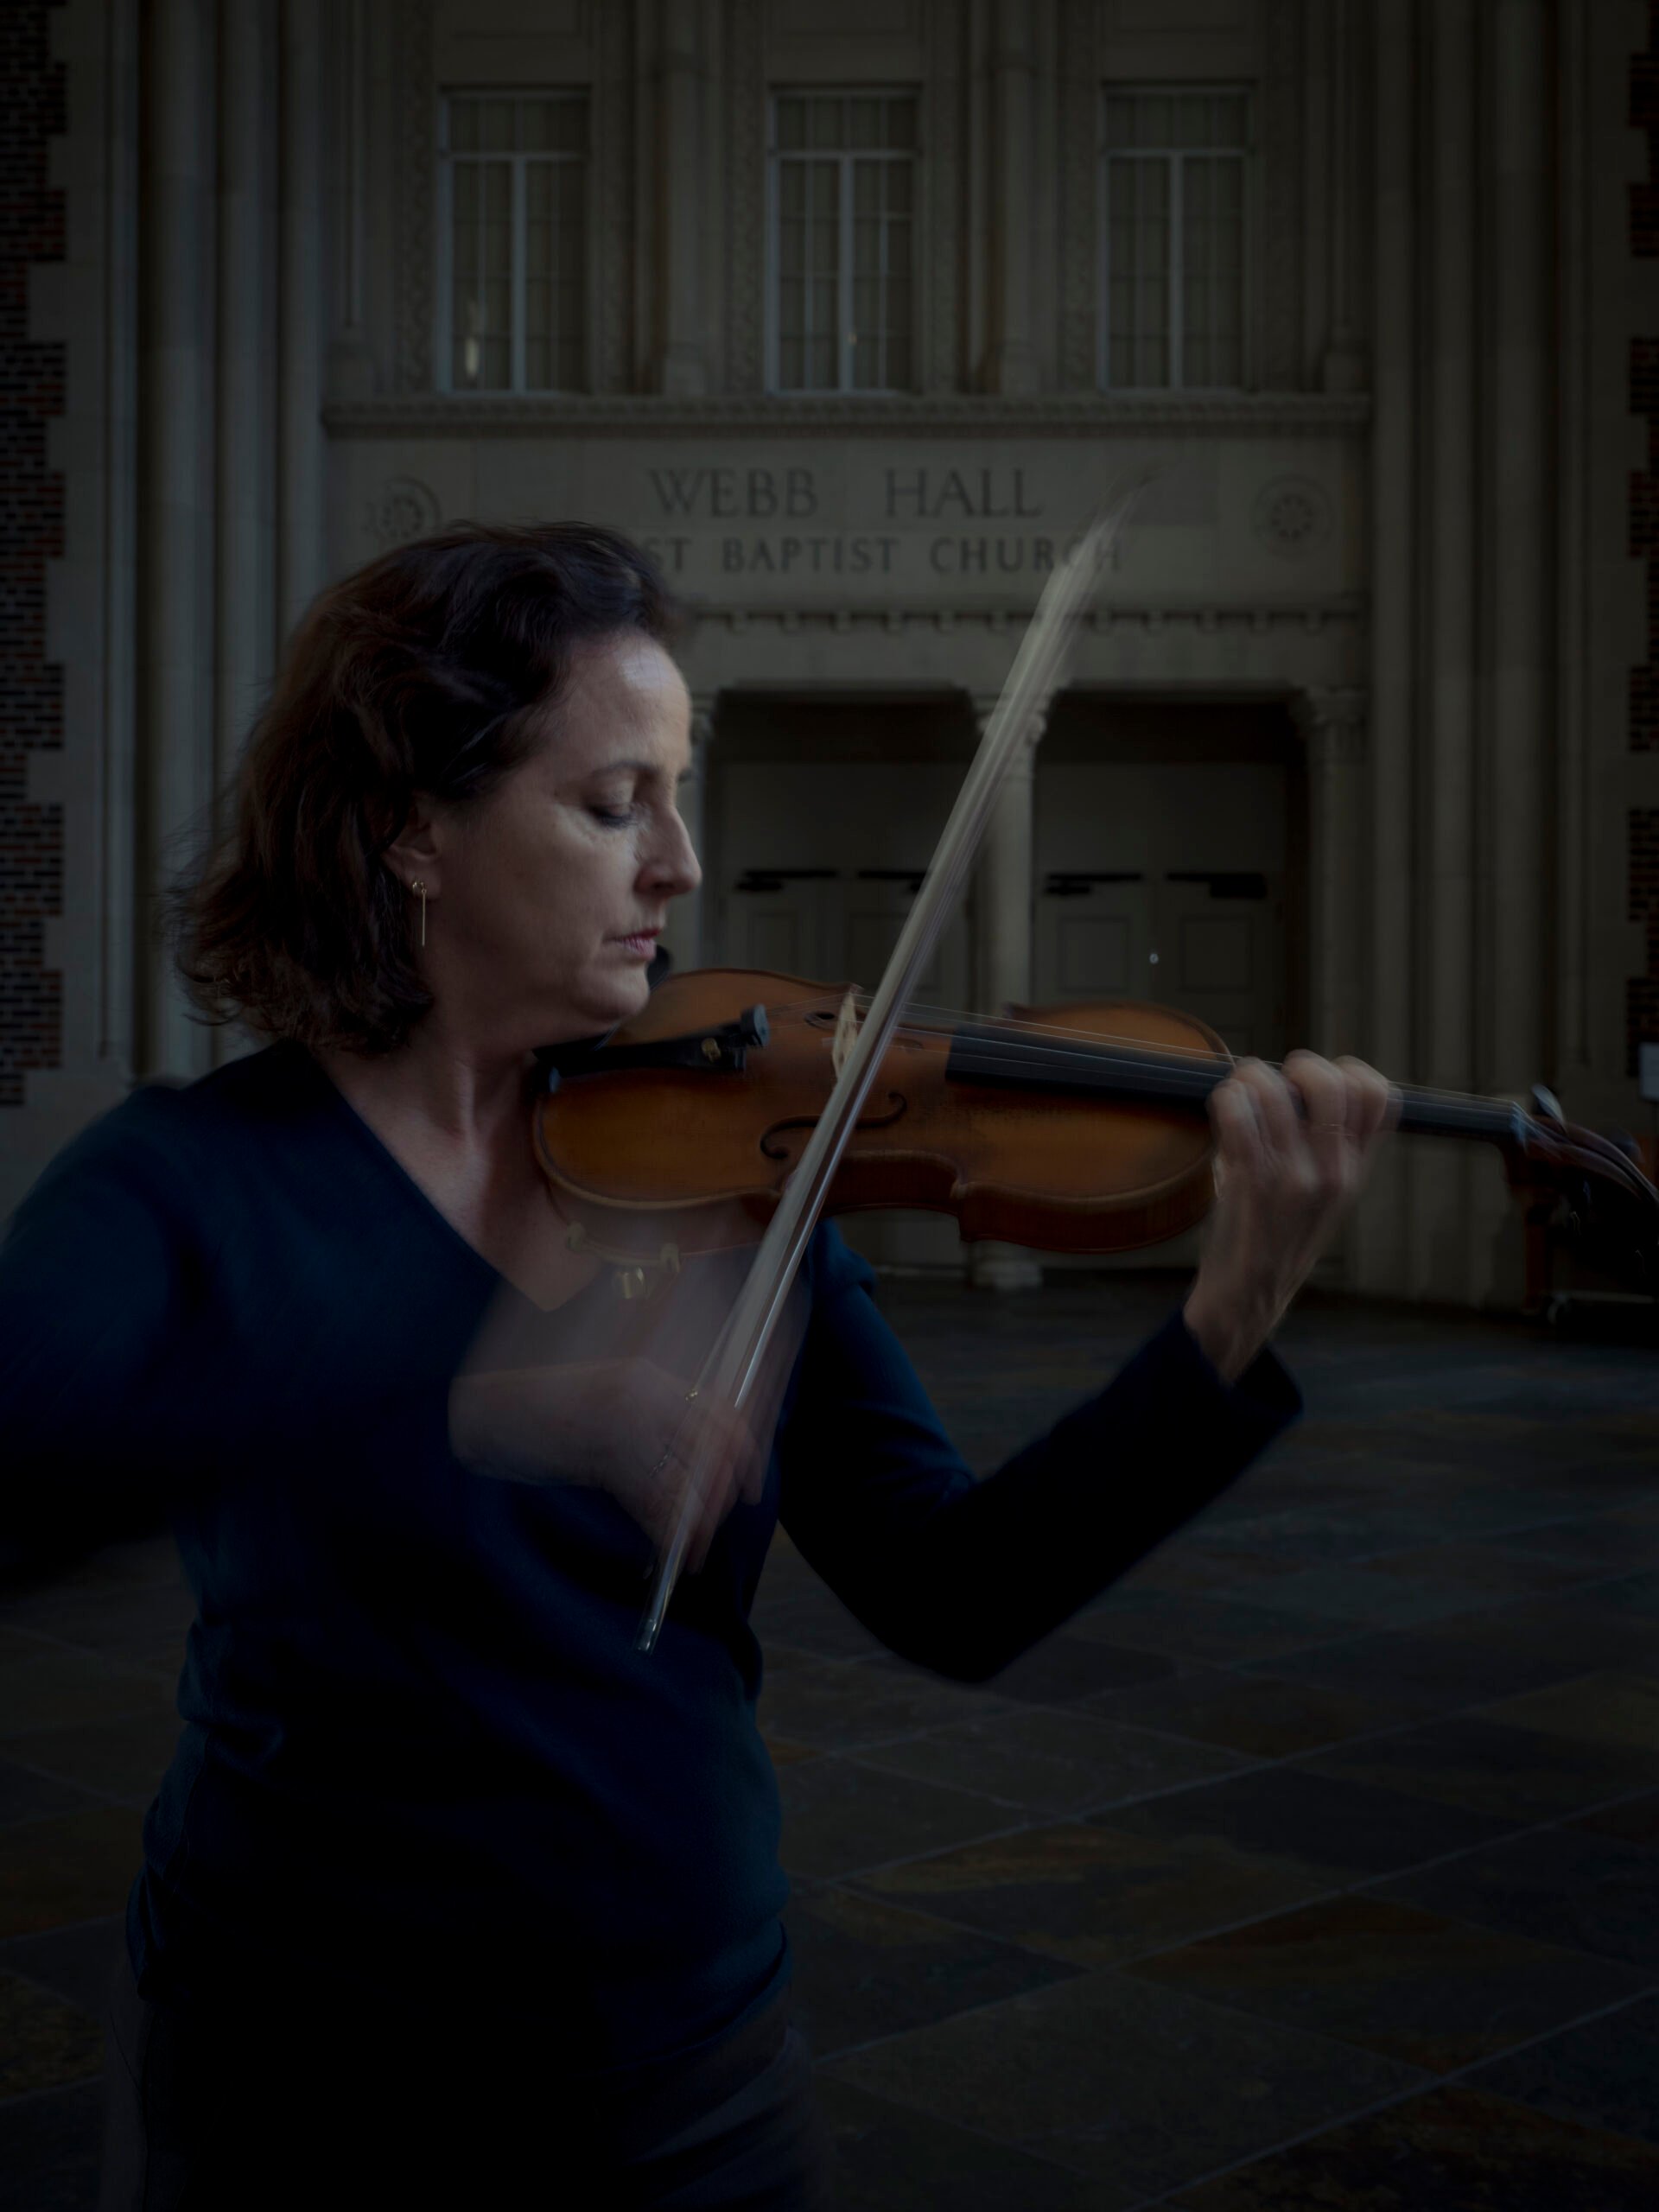 Violinist Angela Caporale performs for a portrait while rehearsing for an upcoming performance with The San Antonio Philharmonic with Conductor Tito Muñoz at First Baptist Church in San Antonio, Tx. U.S., on Thursday, January 12, 2023. The Symphony Society which ran the San Antonio Symphony declared bankruptcy in 2022 and dissolved shortly thereafter, canceling its planned season and putting its musicians out of work. The musicians reorganized as the San Antonio Philharmonic which is currently in the midst of its spring season.